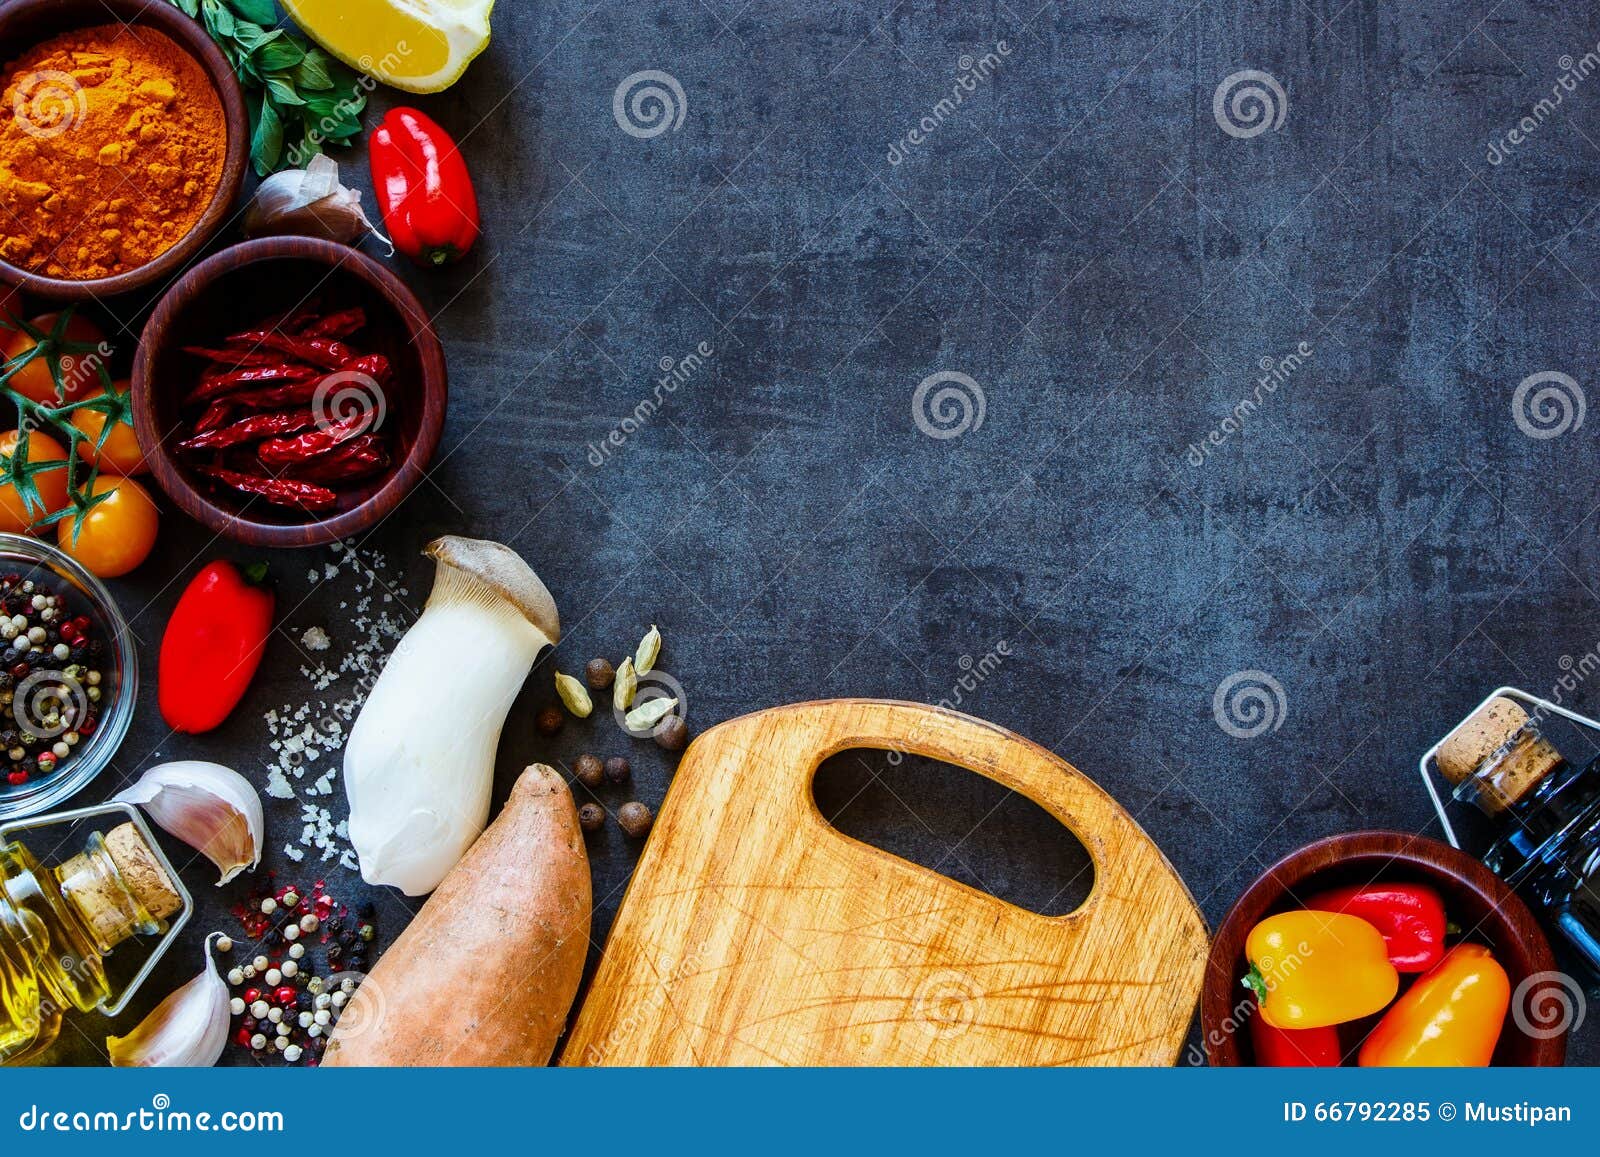 Cooking Ingredients Background Stock Image - Image of cutting, garden ...